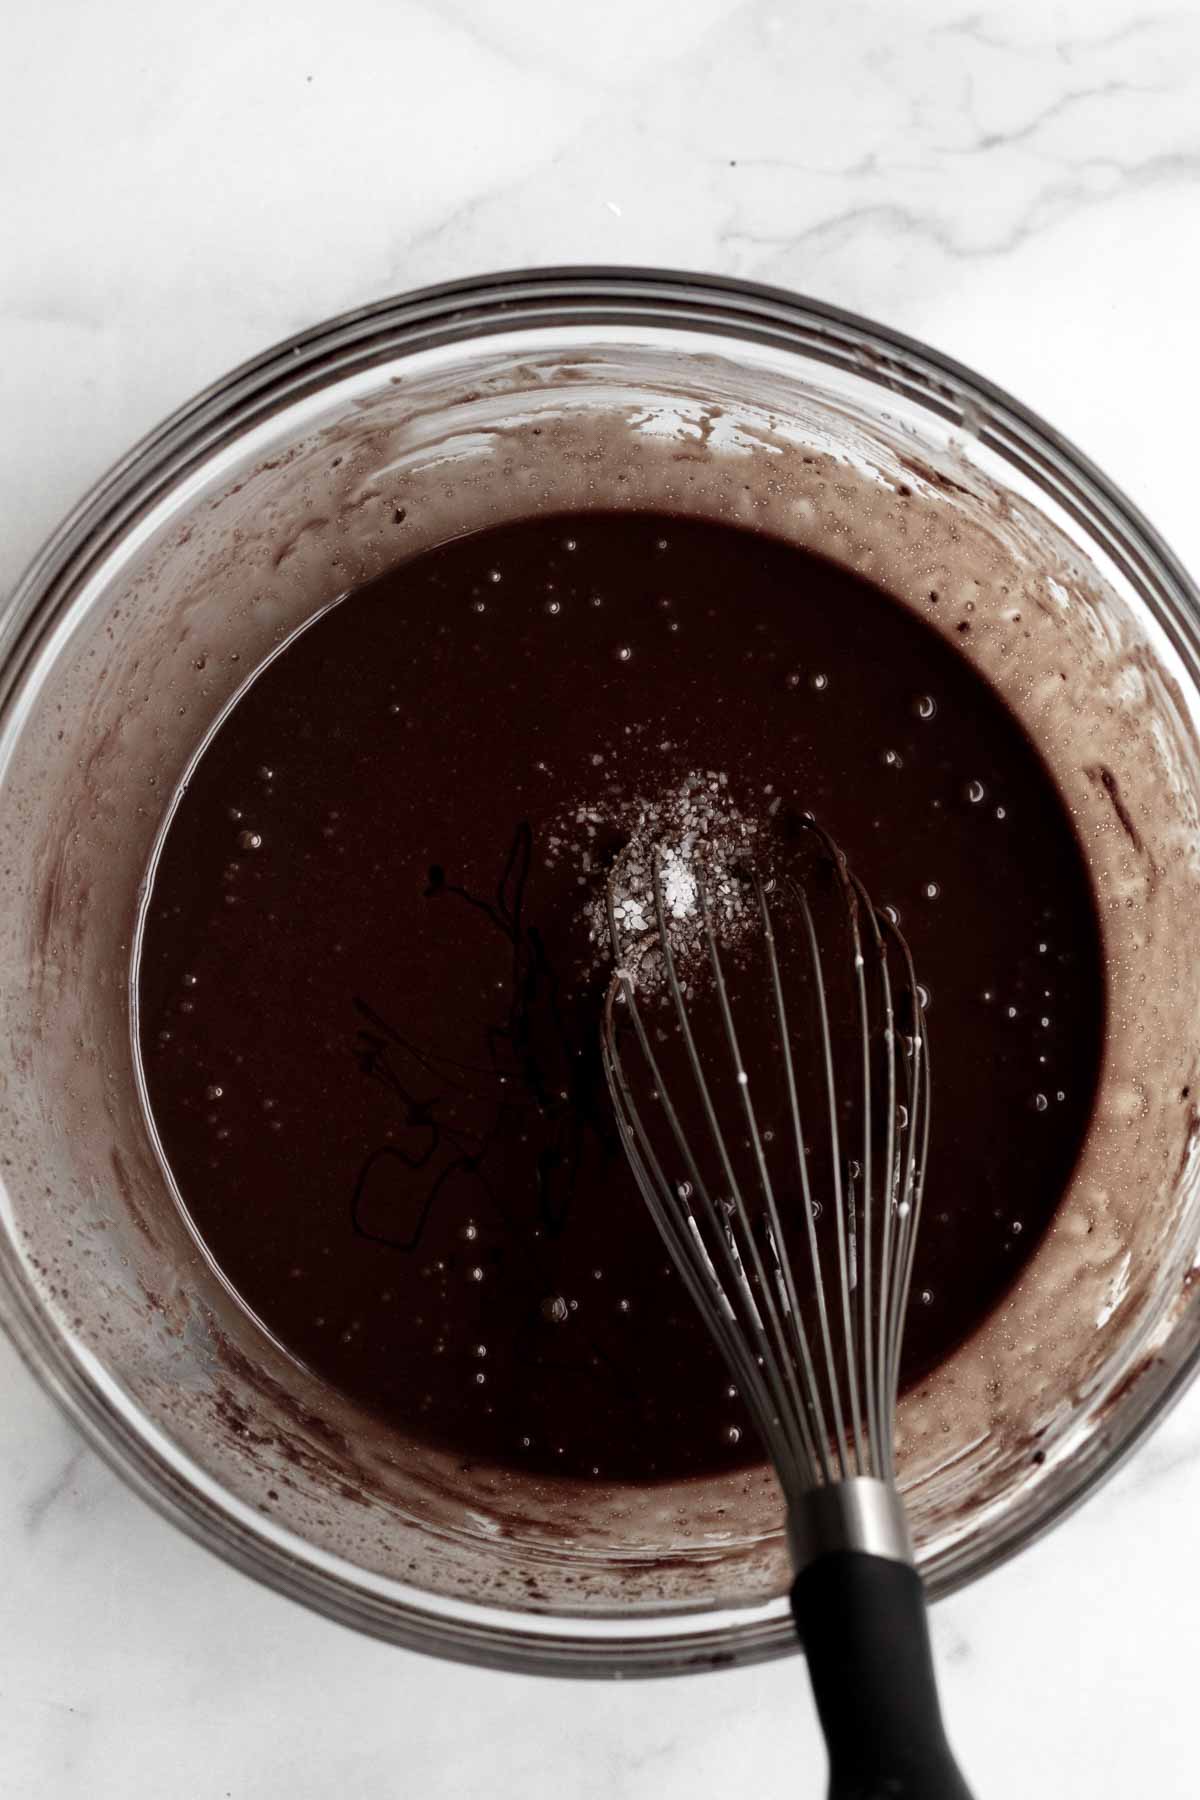 Mixing in the salt into the chocolate batter.